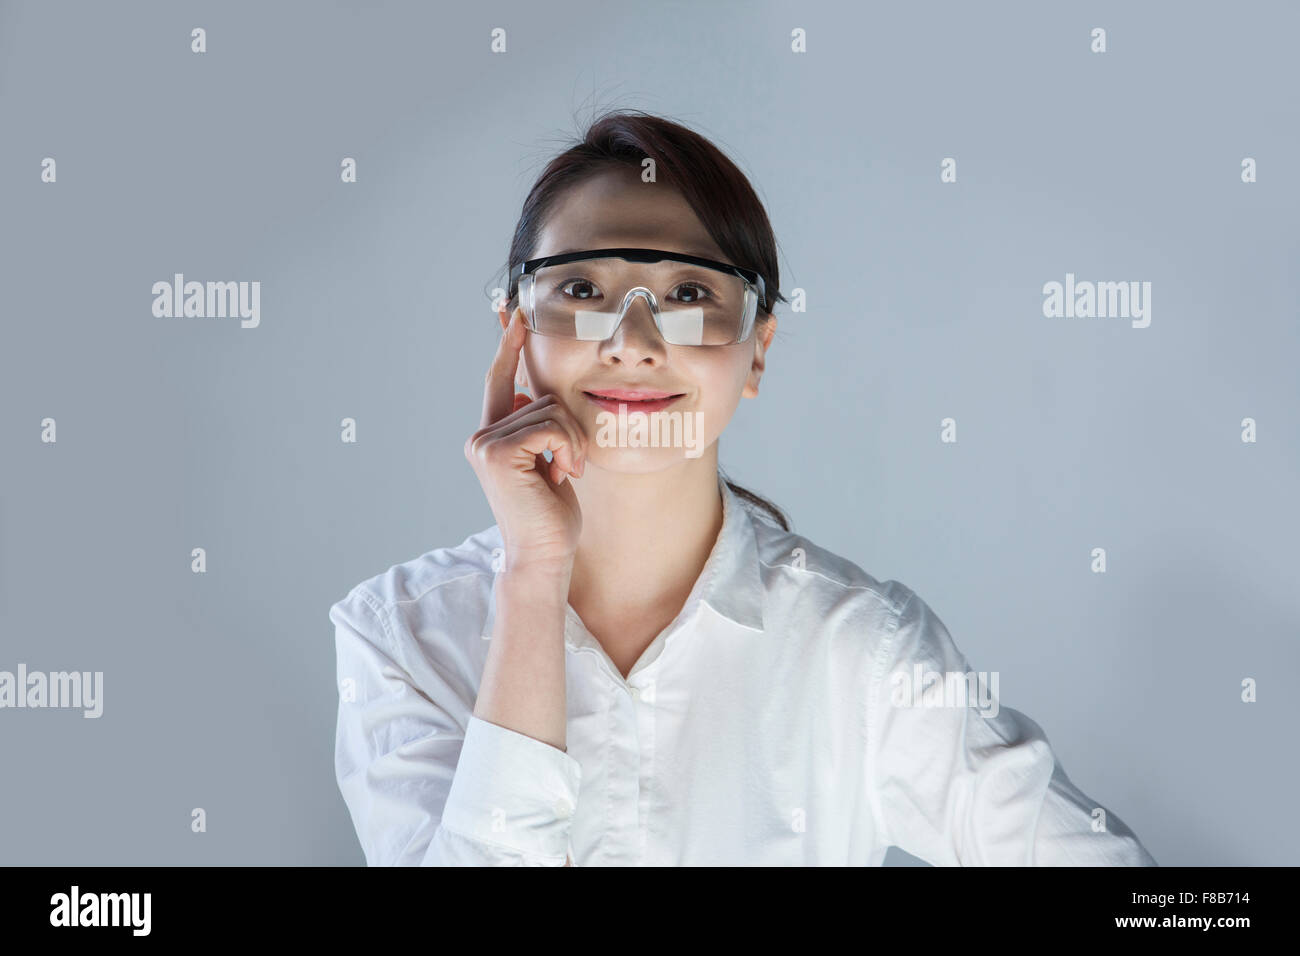 Business woman wearing goggles and staring forward with a smile Stock Photo